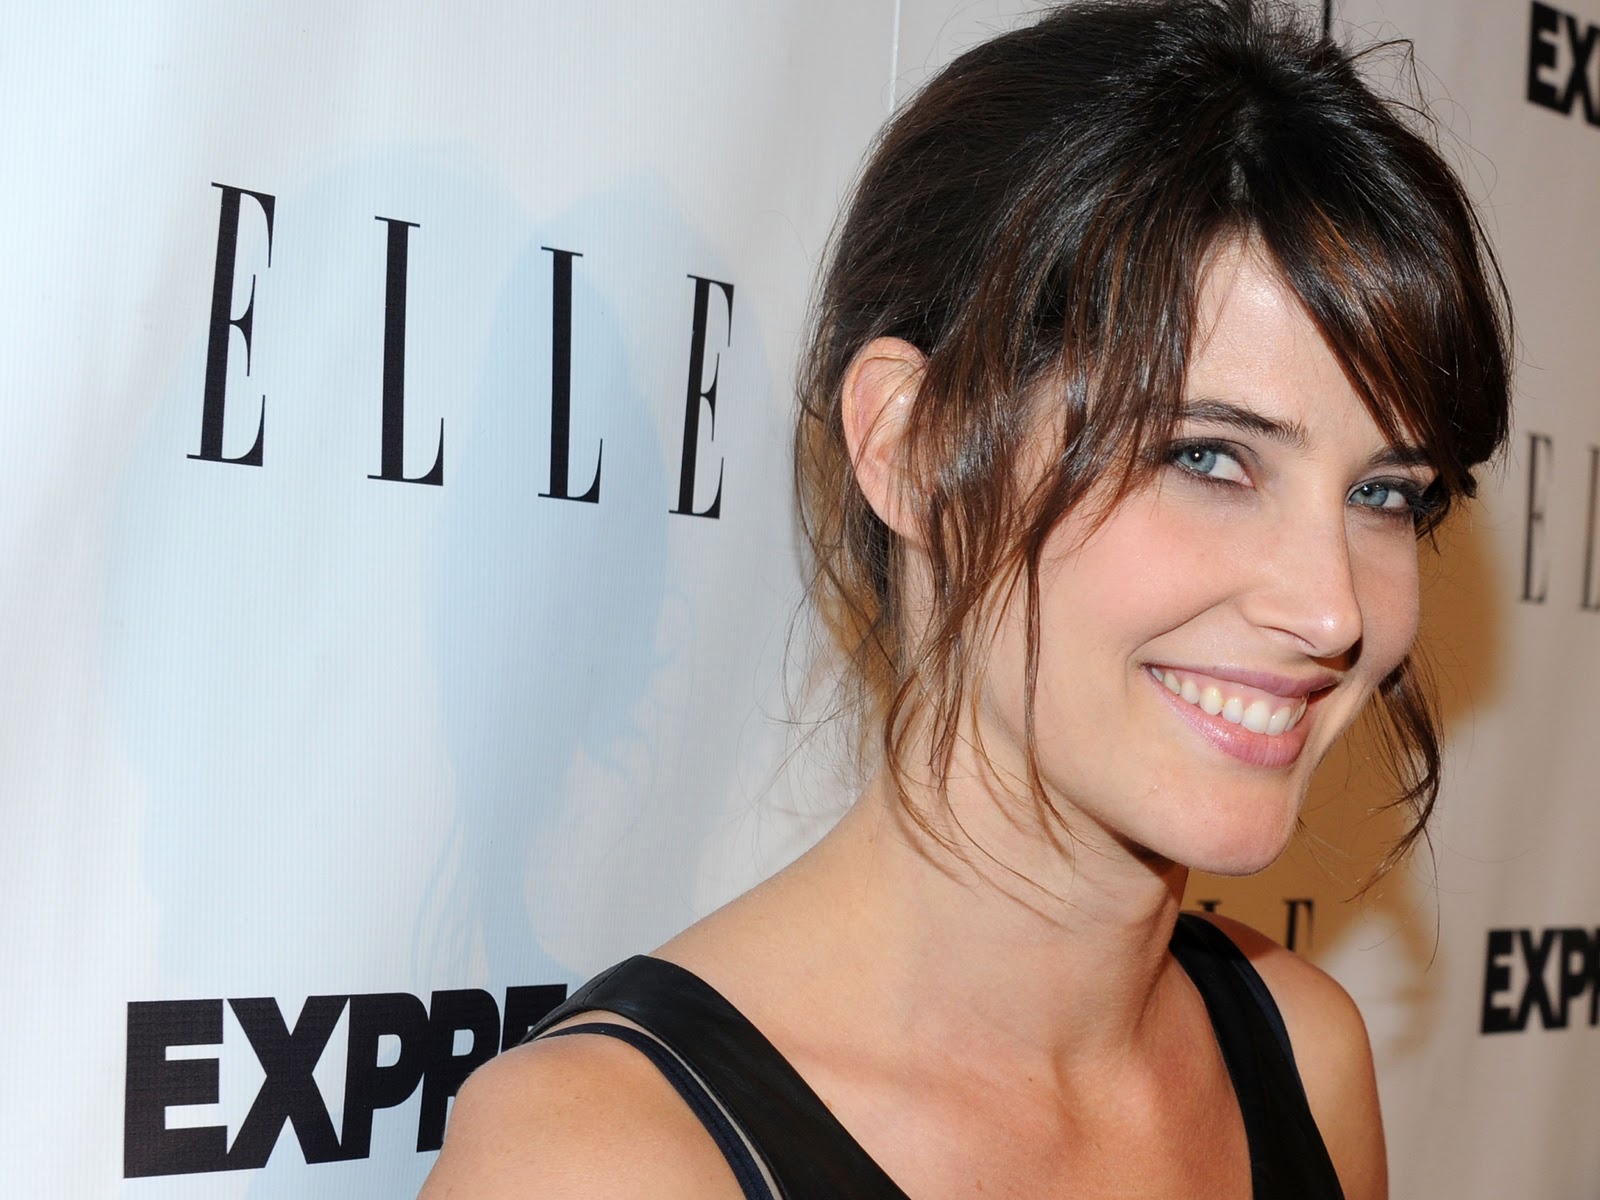 Cobie Smulders Young Star Profile and Images 2012 